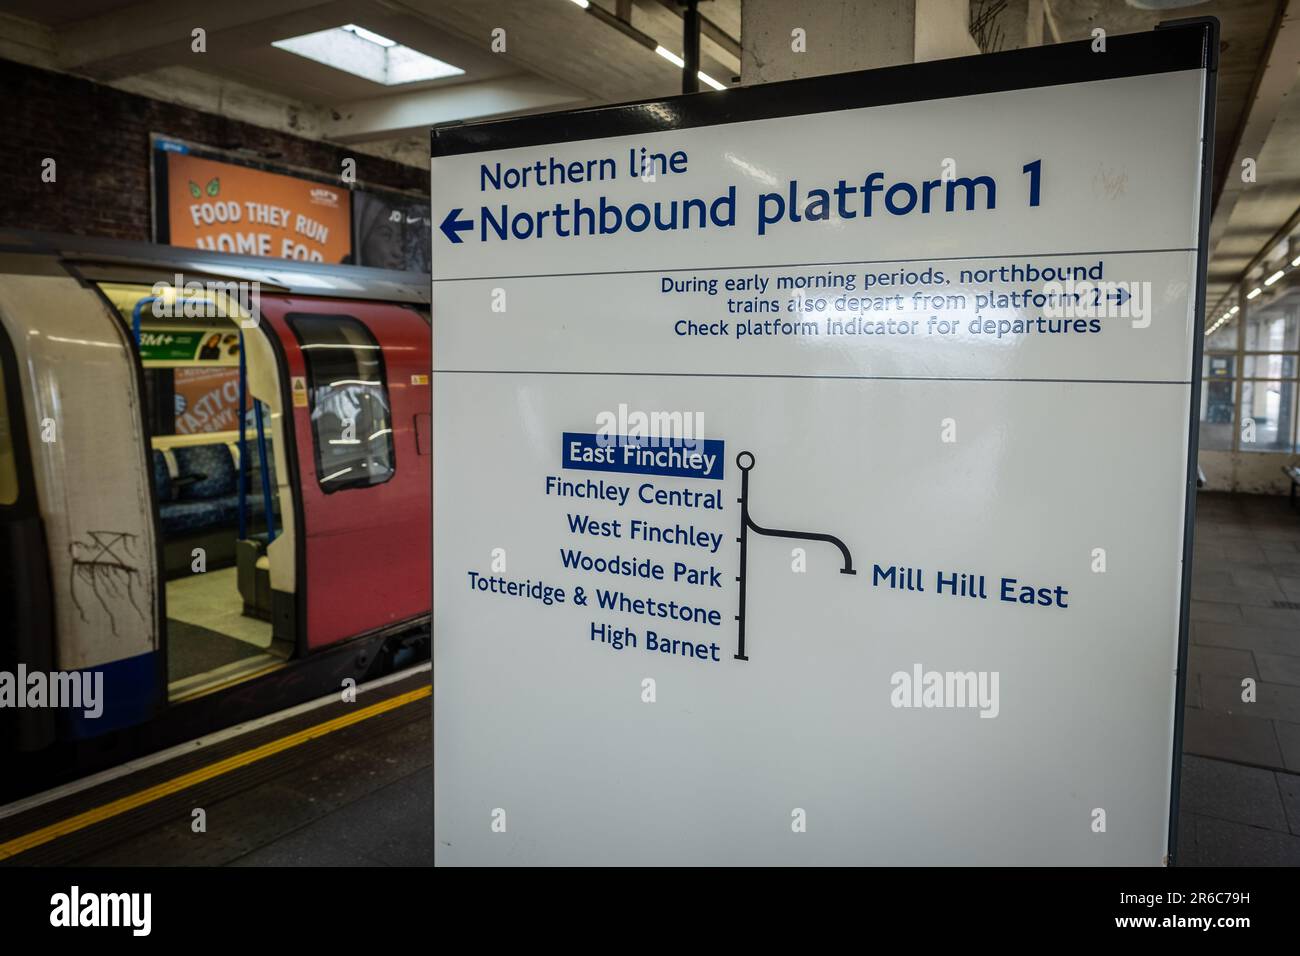 LONDON- MARCH 21, 2023: East Finchley Underground station, a Northern Line station in Barnet area of North London Stock Photo